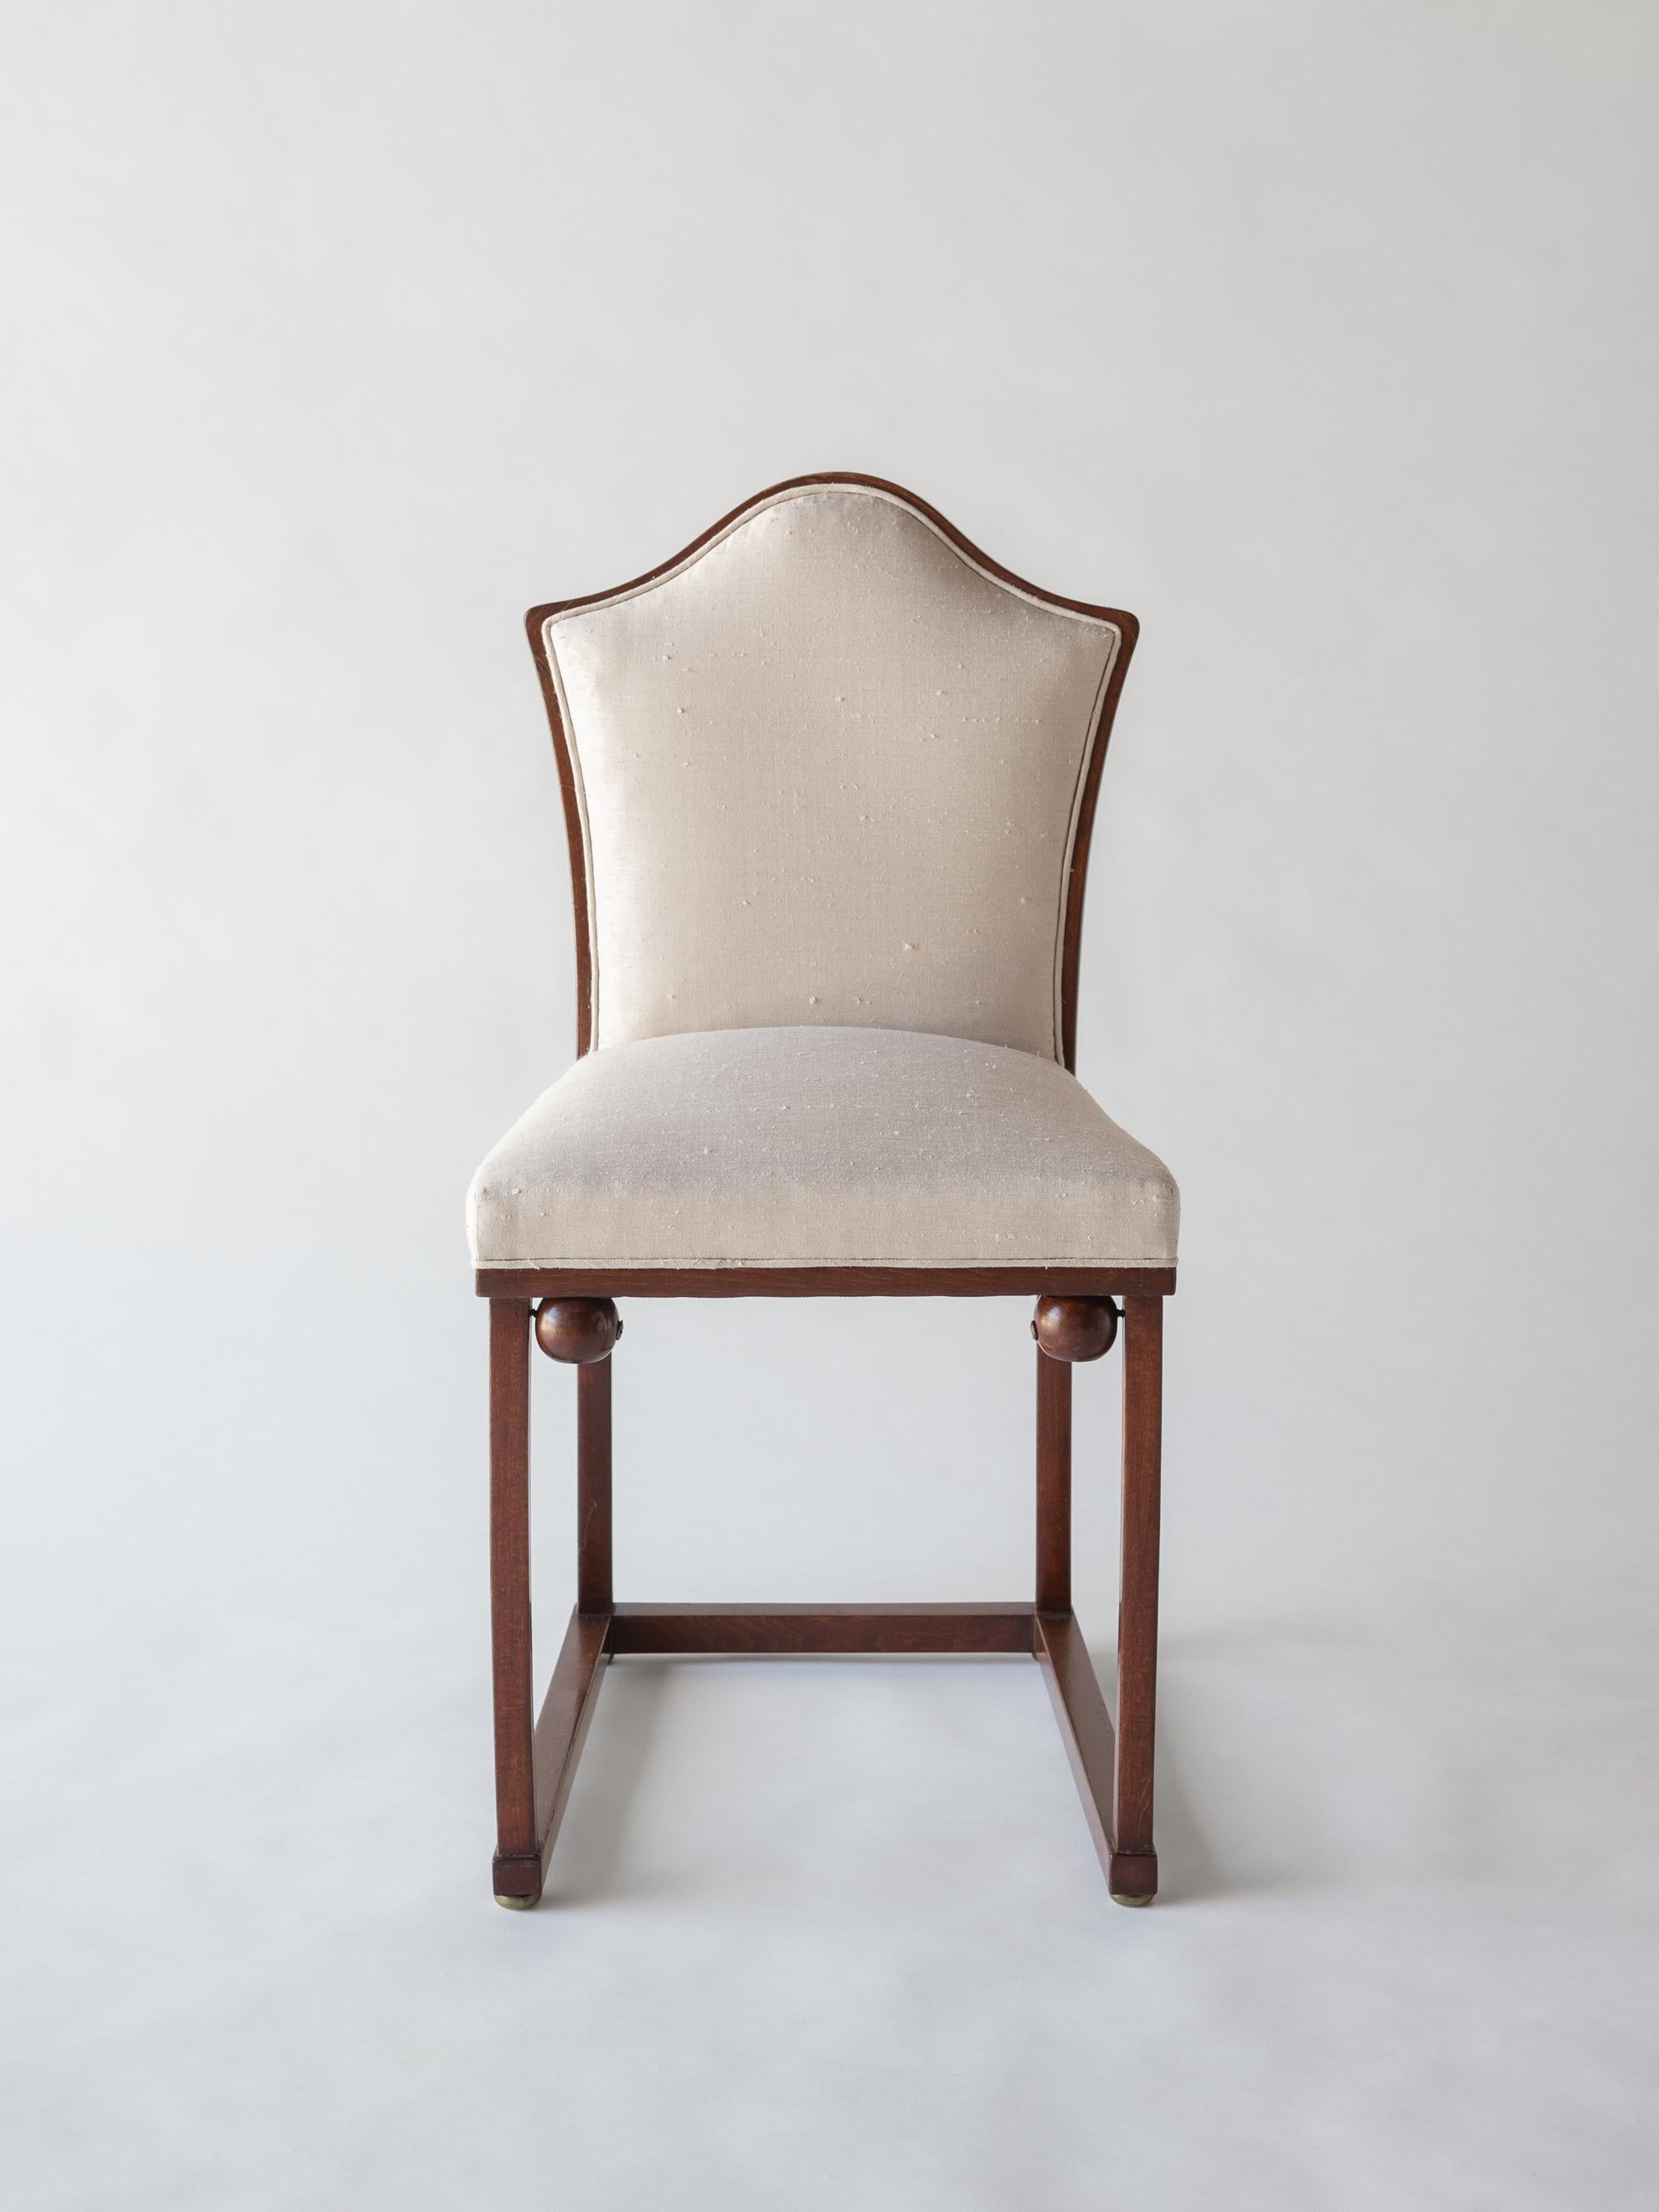 A Vienna Secessionist bentwood chair with upholstered back and seat. Gracefully sloped bell-shaped back gives way to a comfortable upholstered back and seat. Corner ball enforcement details (a signature of Hoffmann) decorate the chair's front legs.